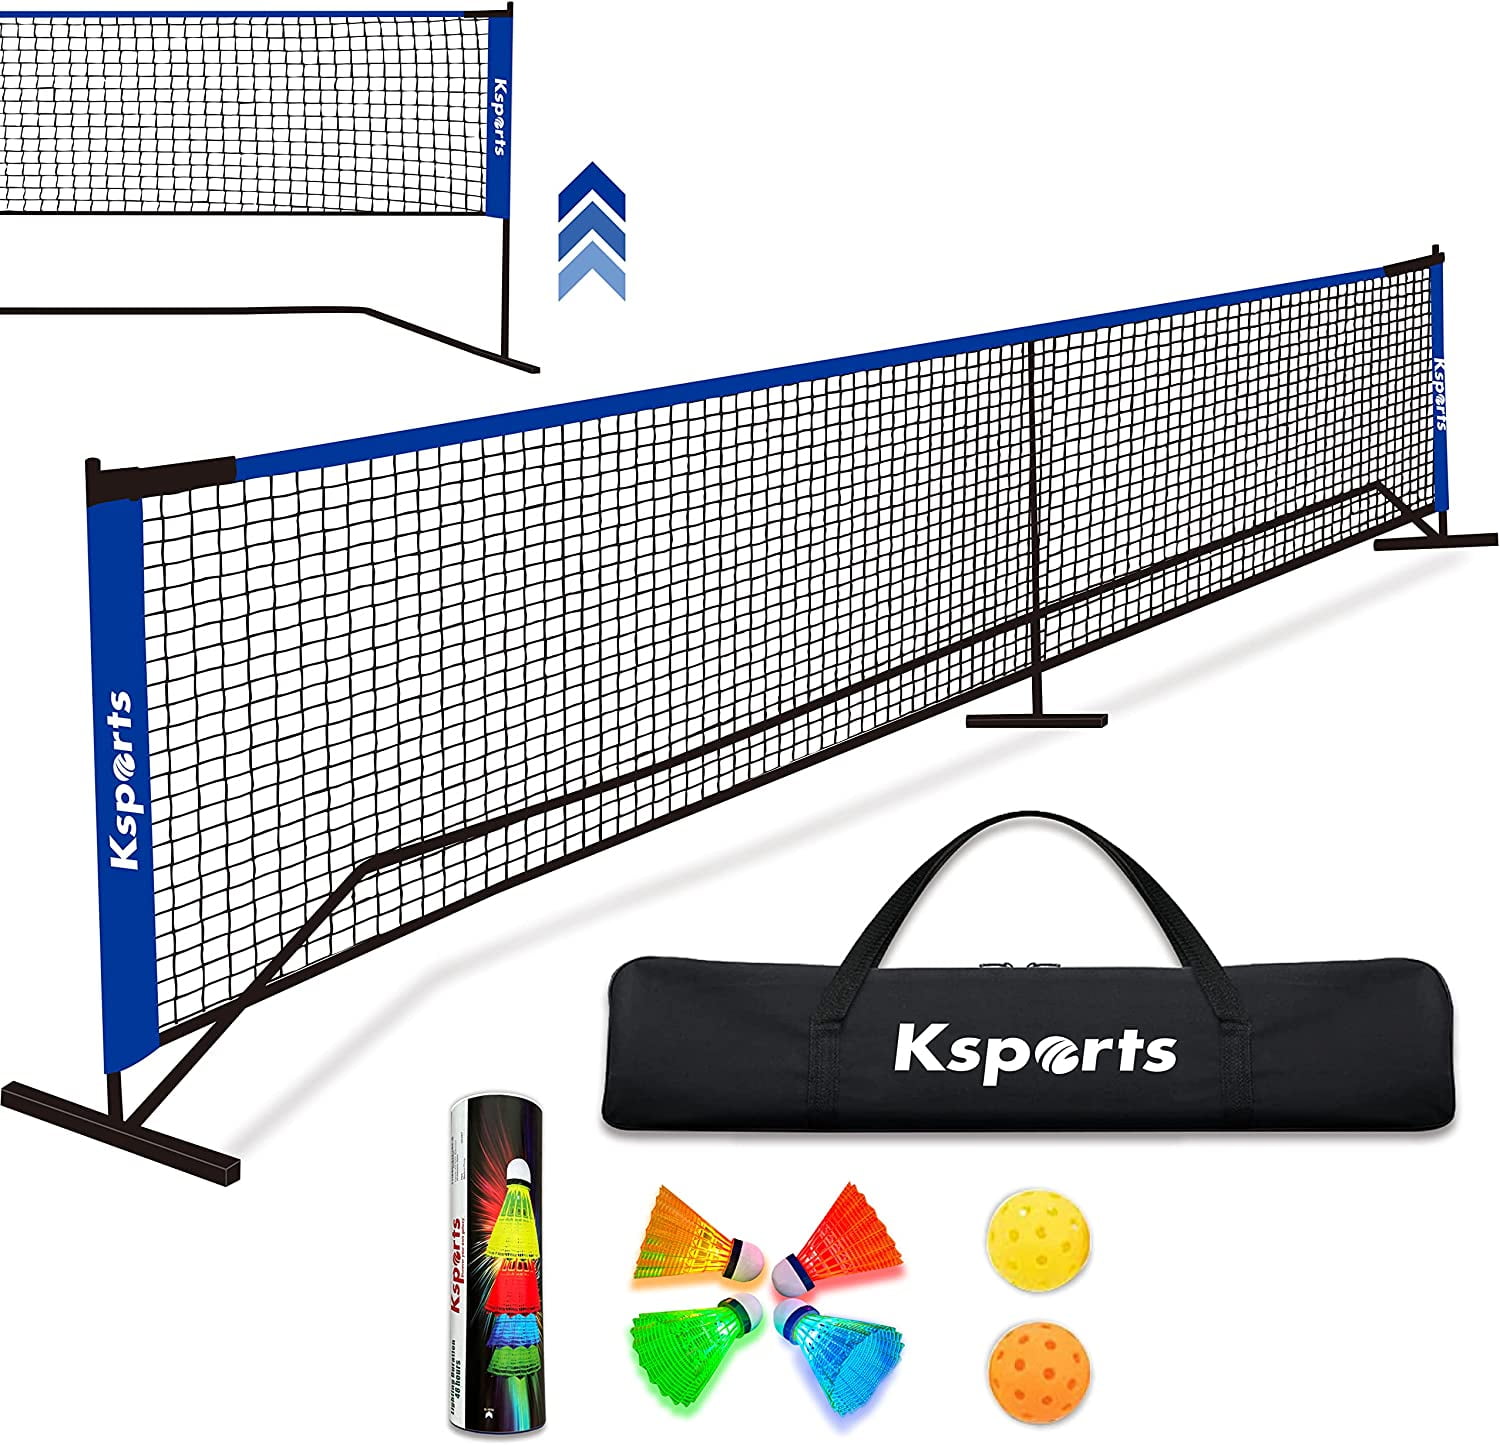 Ksports Regulation Size Pickleball Net 22 Feet Blue, can be Used as ...